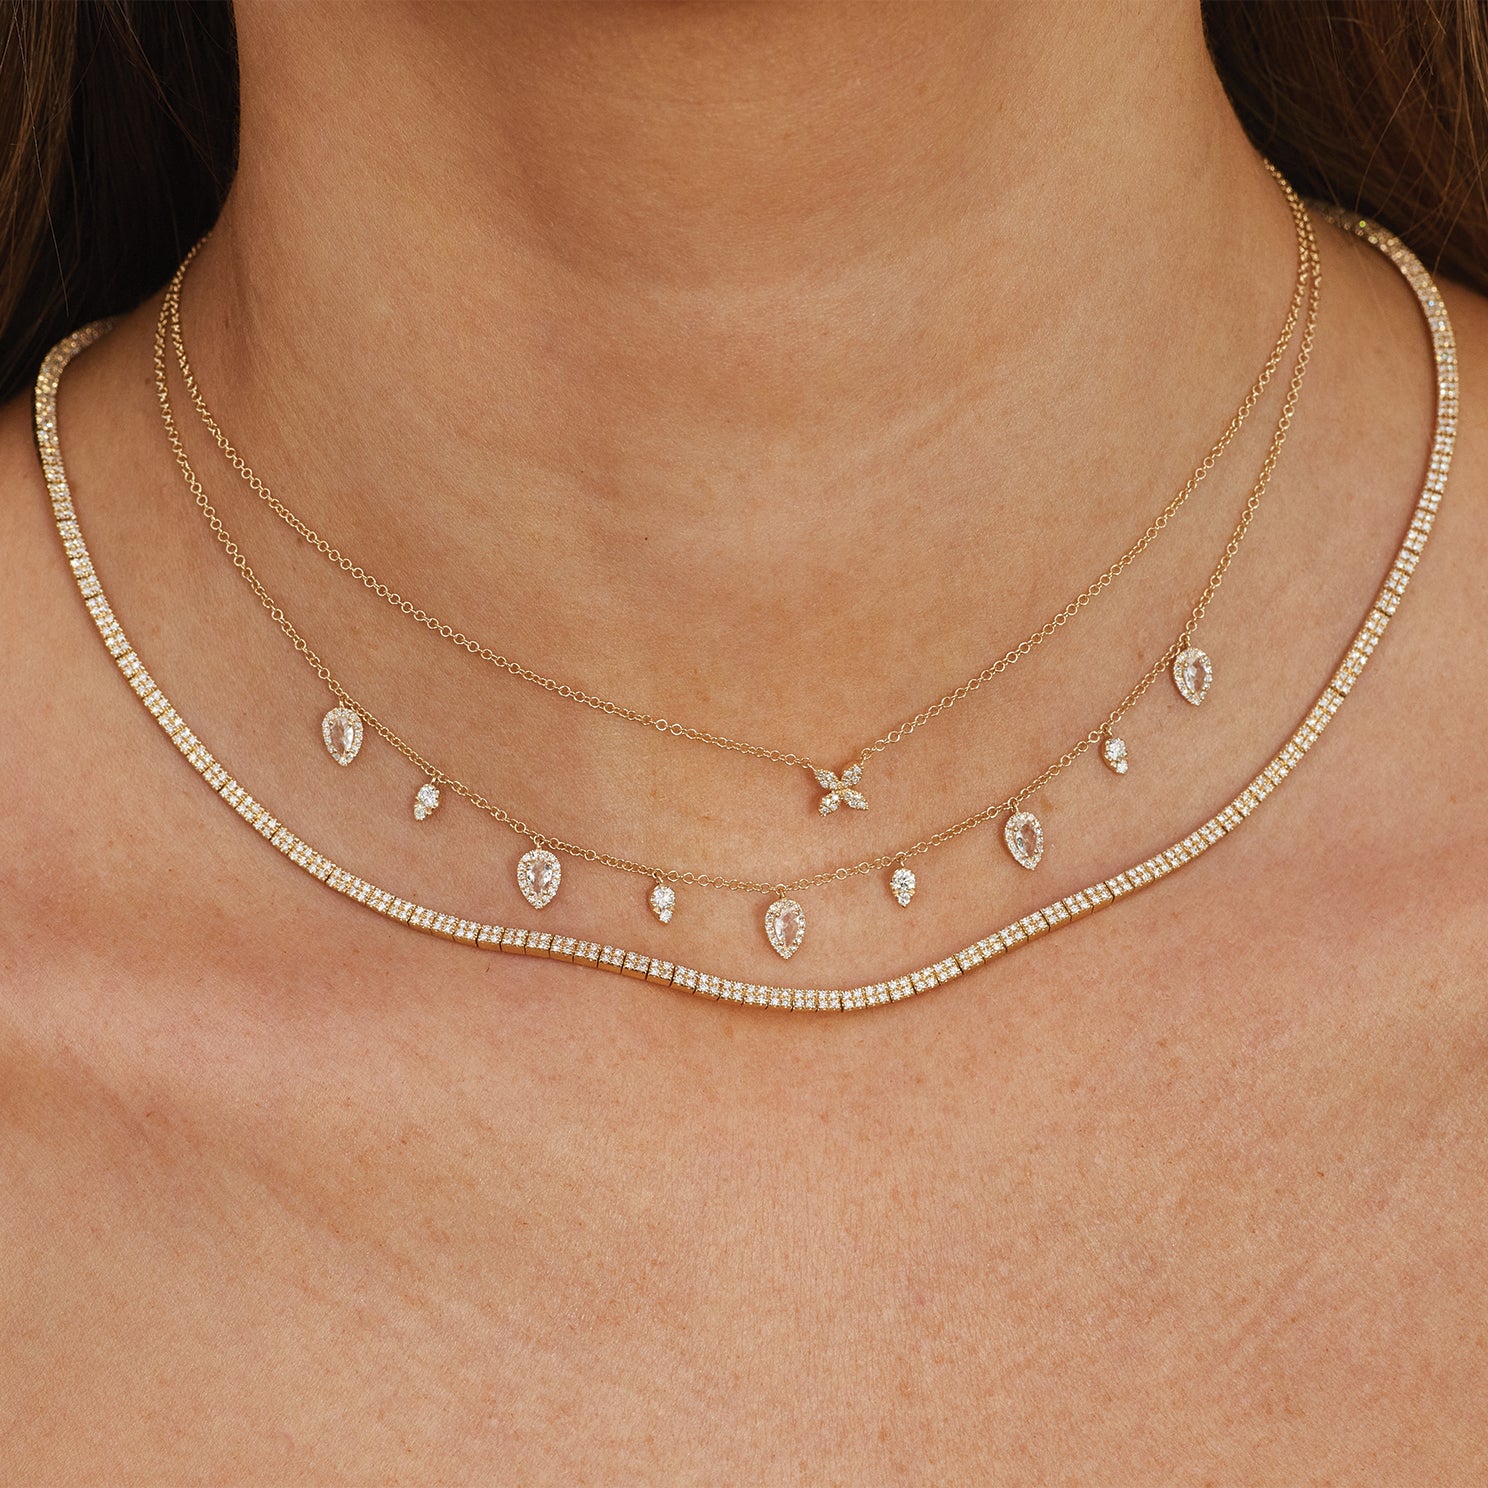 Diamond & White Quartz Ultimate Teardrop Necklace styled on neck of model with gold and diamond necklaces